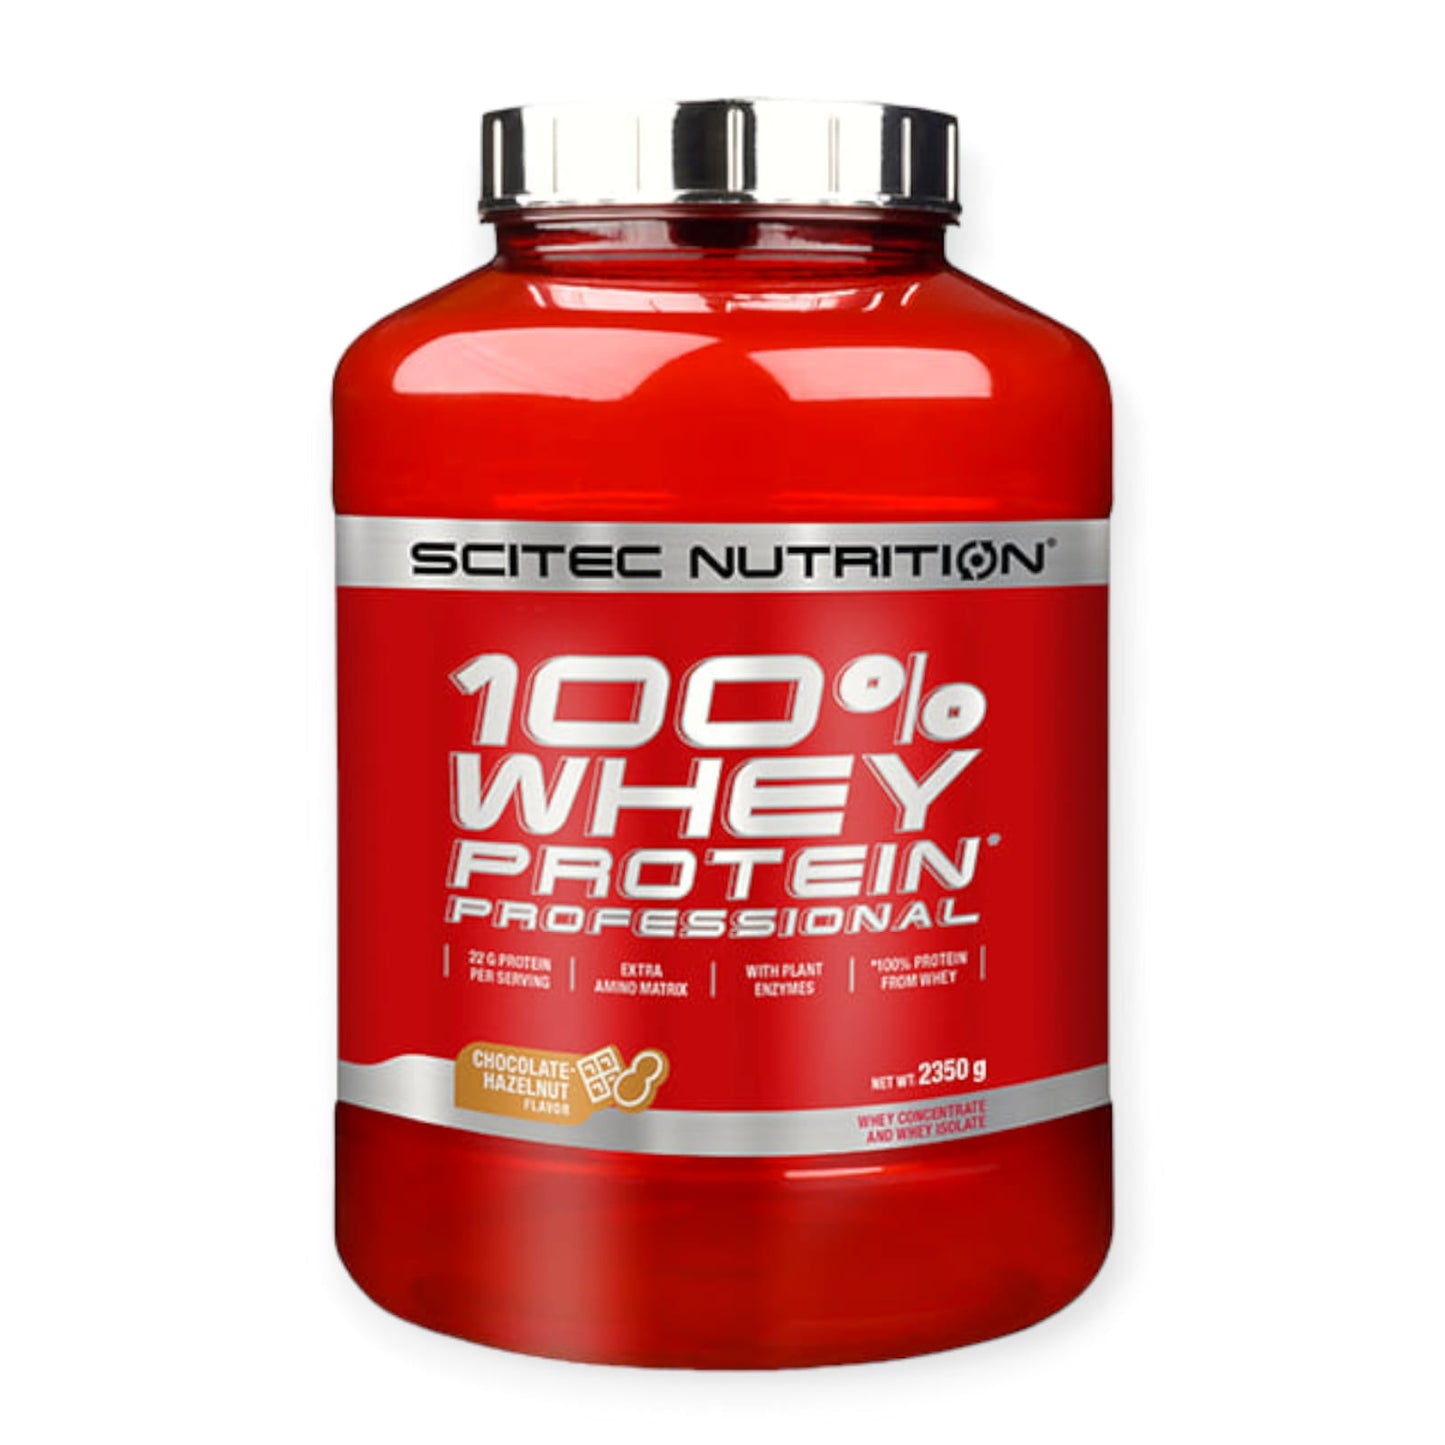 100% WHEY PROTEIN PROFESSIONAL 2.350 GRS. 78 SERVICIOS - SCITEC NUTRITION